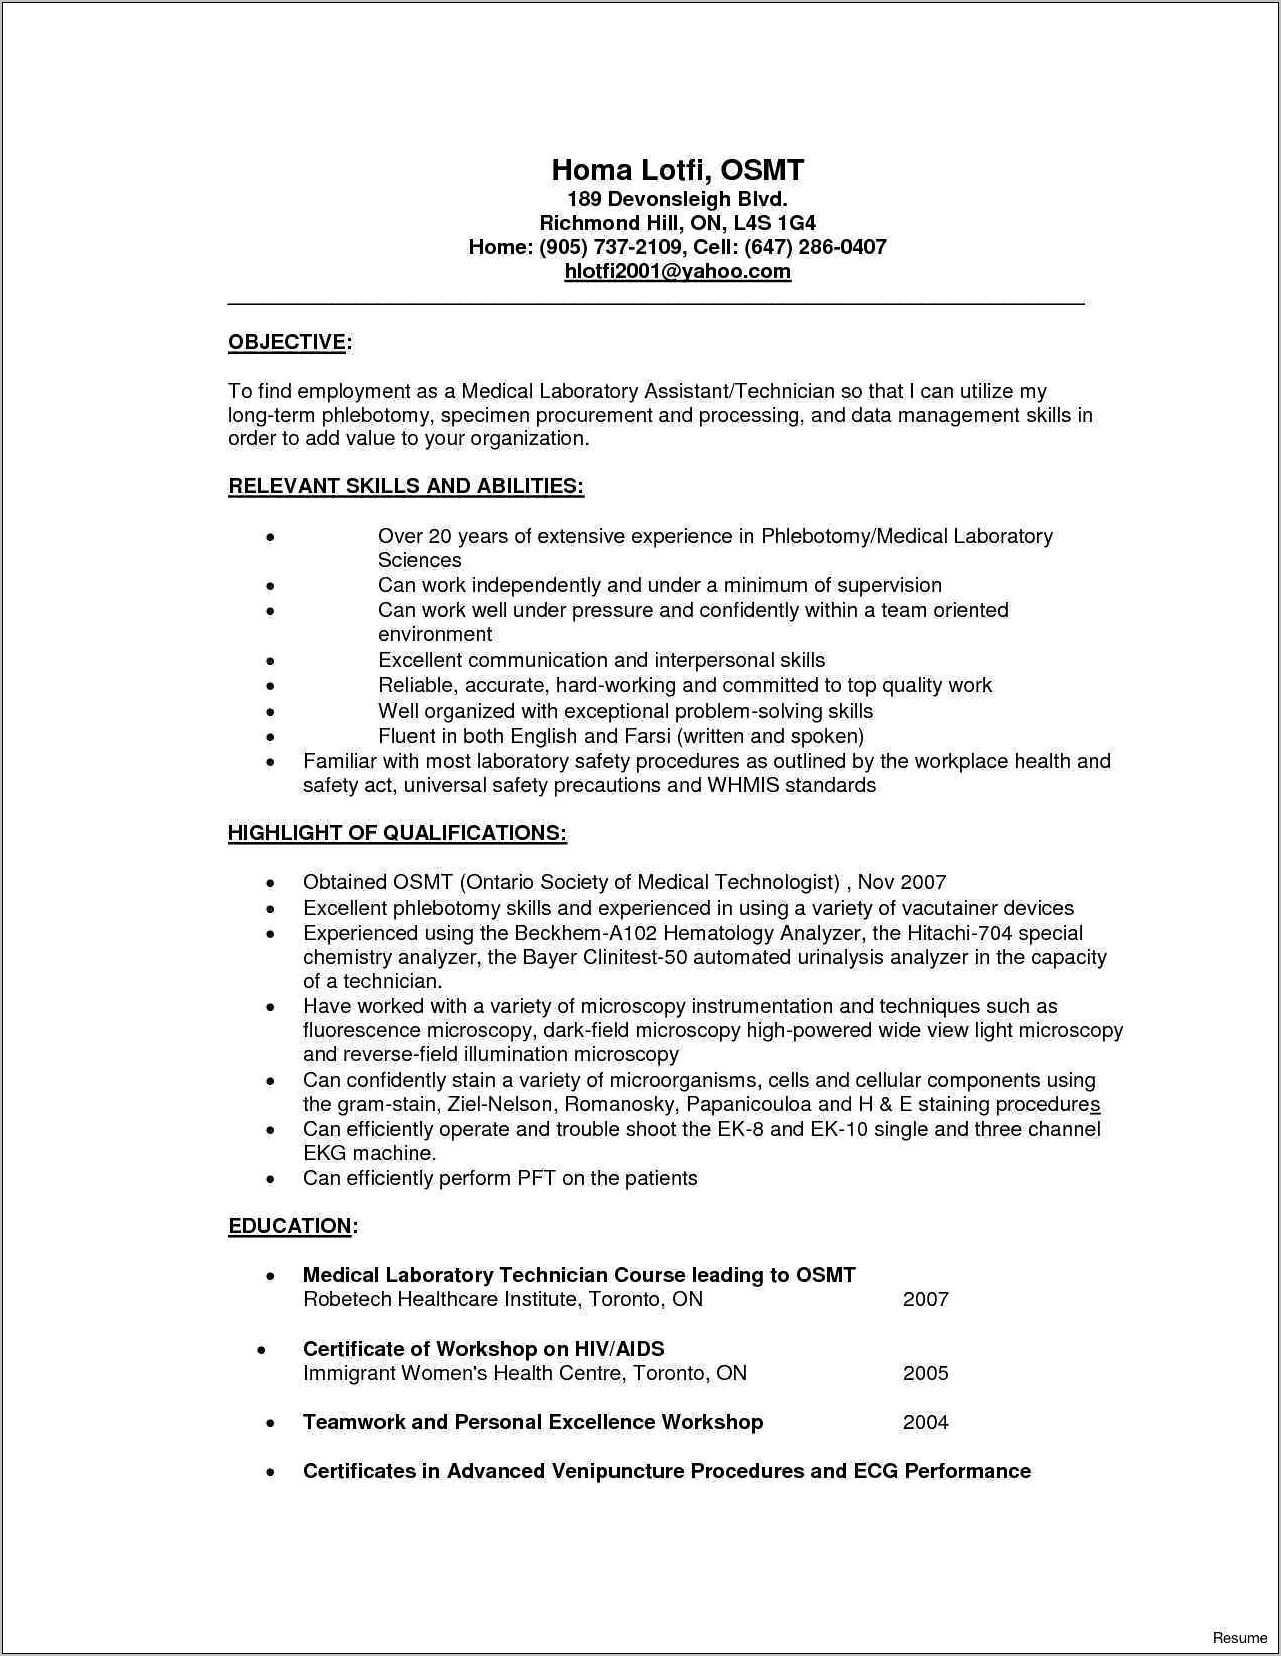 Resume Objective For Applying To Lab